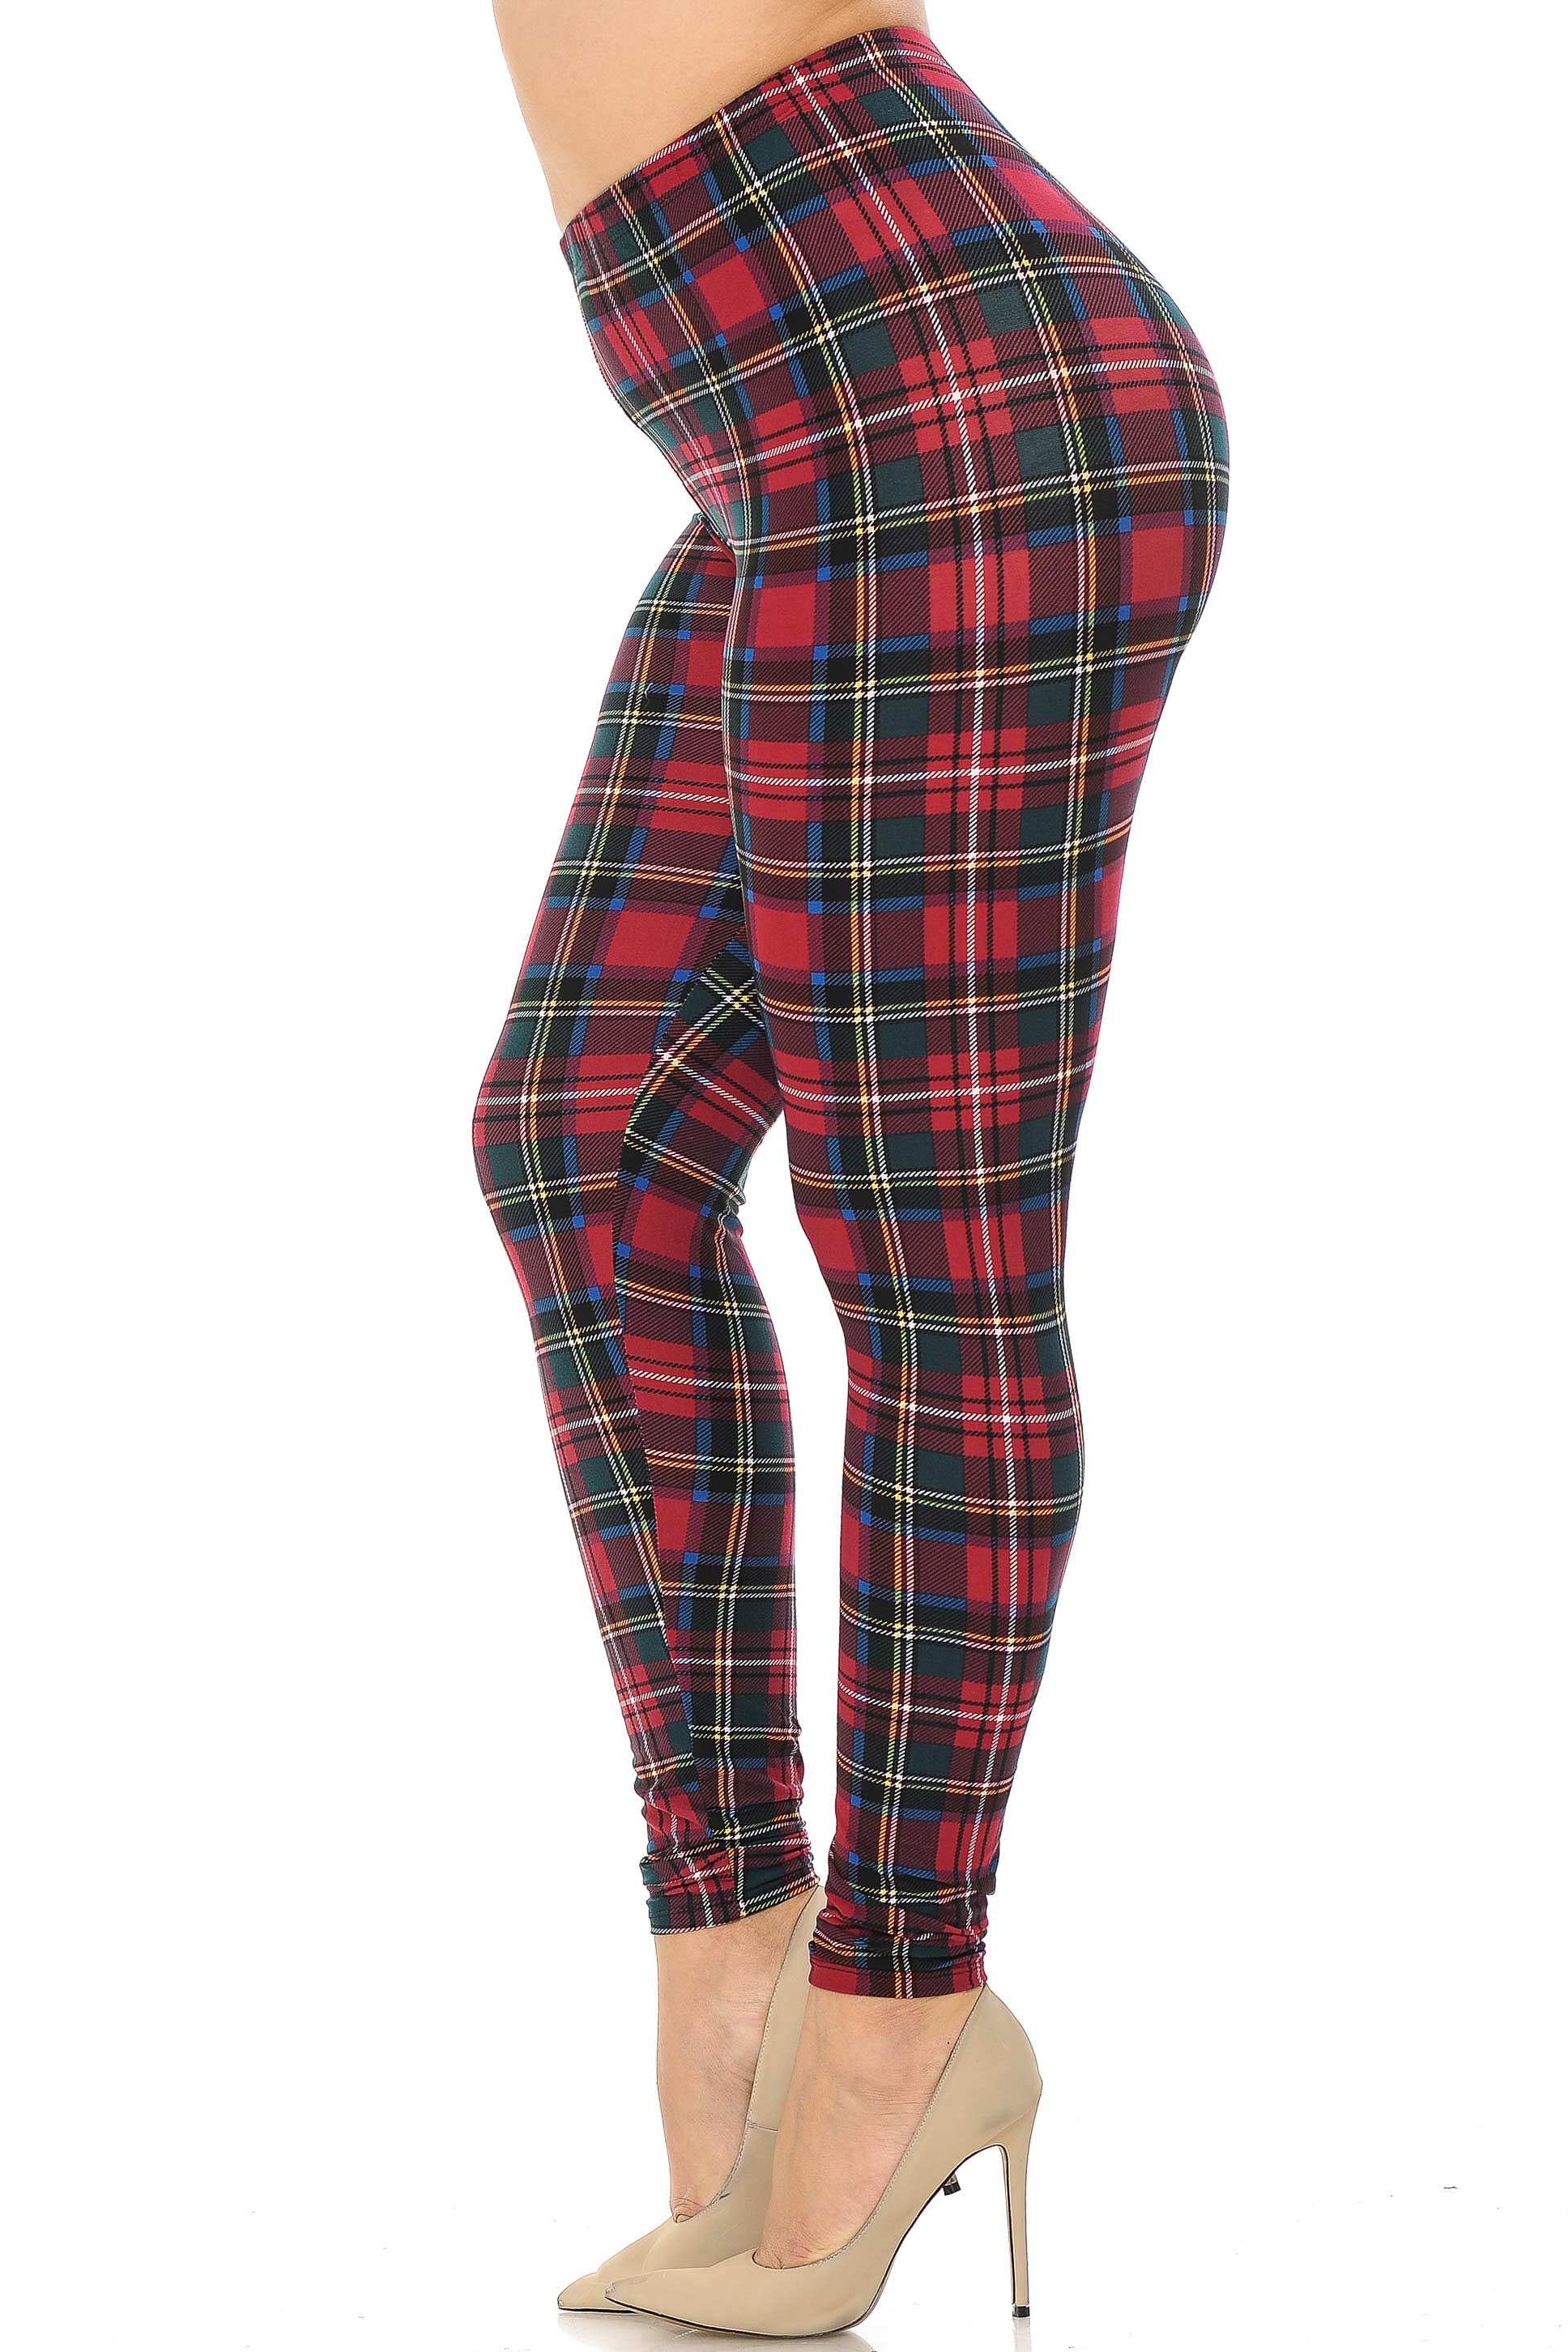 Wholesale Buttery Smooth Modish Plaid Extra Plus Size Leggings - 3X-5X